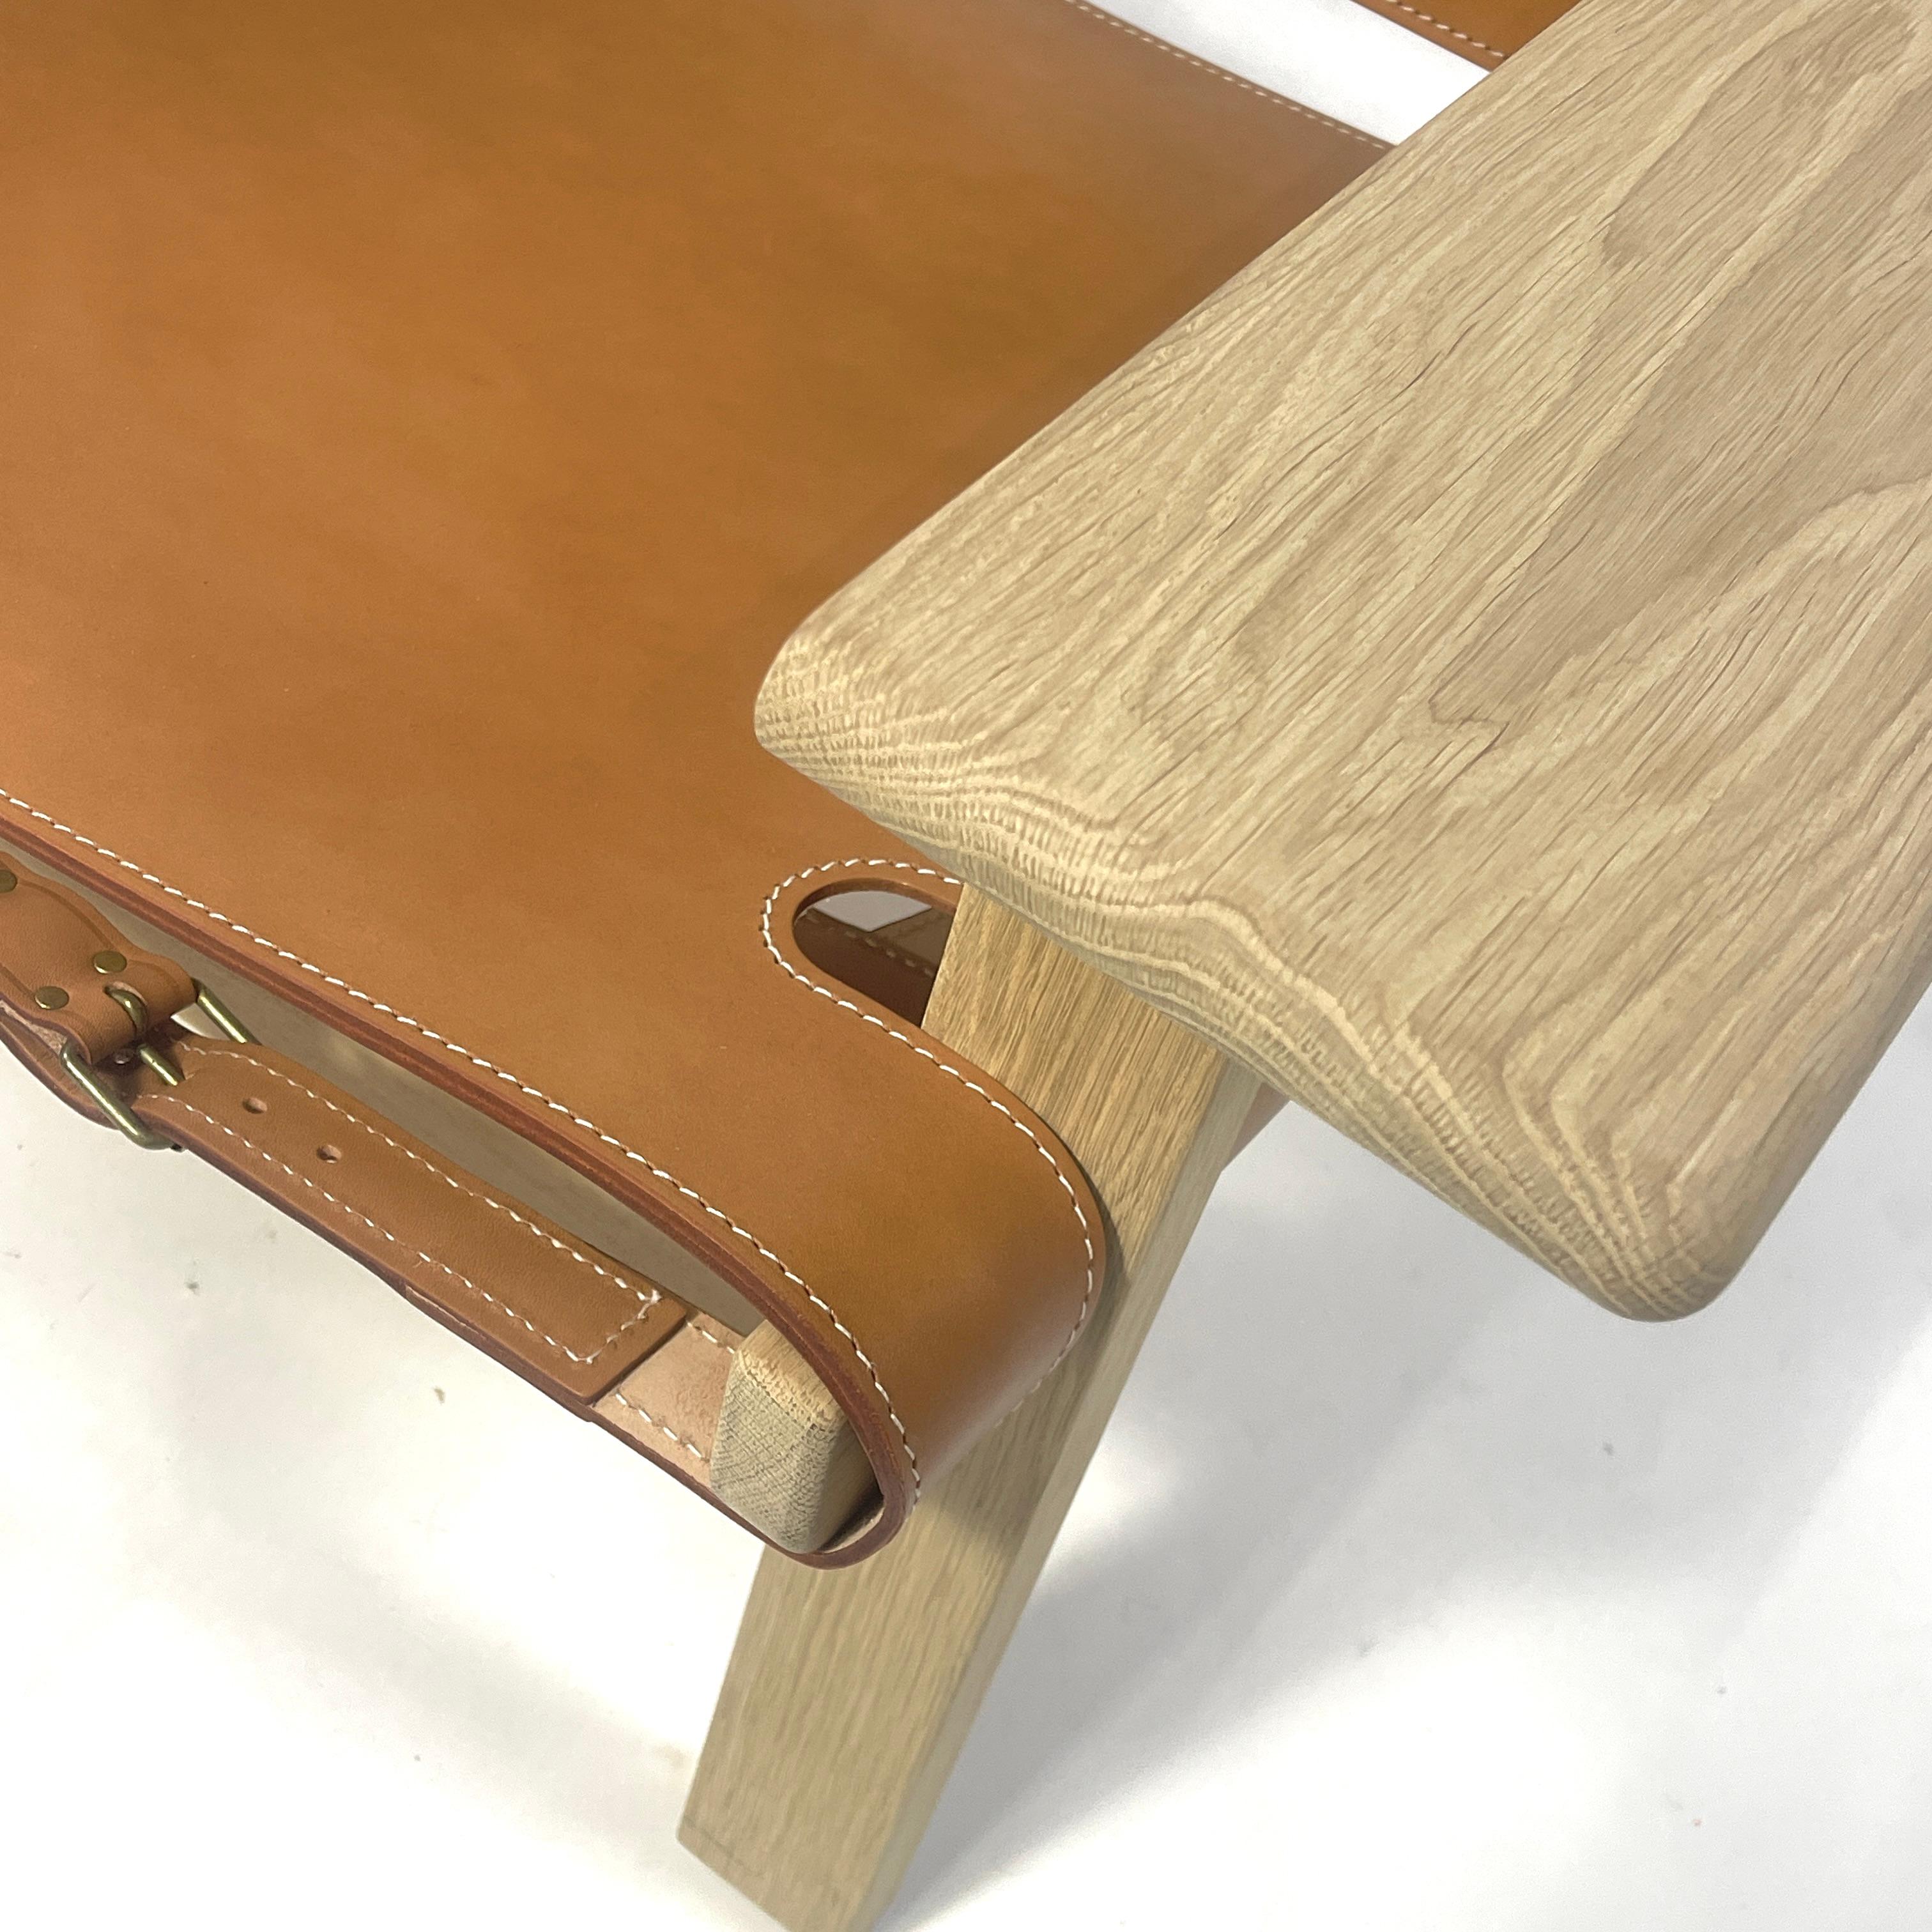 Oiled Excellent Børge Mogensen Oak & Saddle Leather 1958 Spanish Chair for Frederica  For Sale